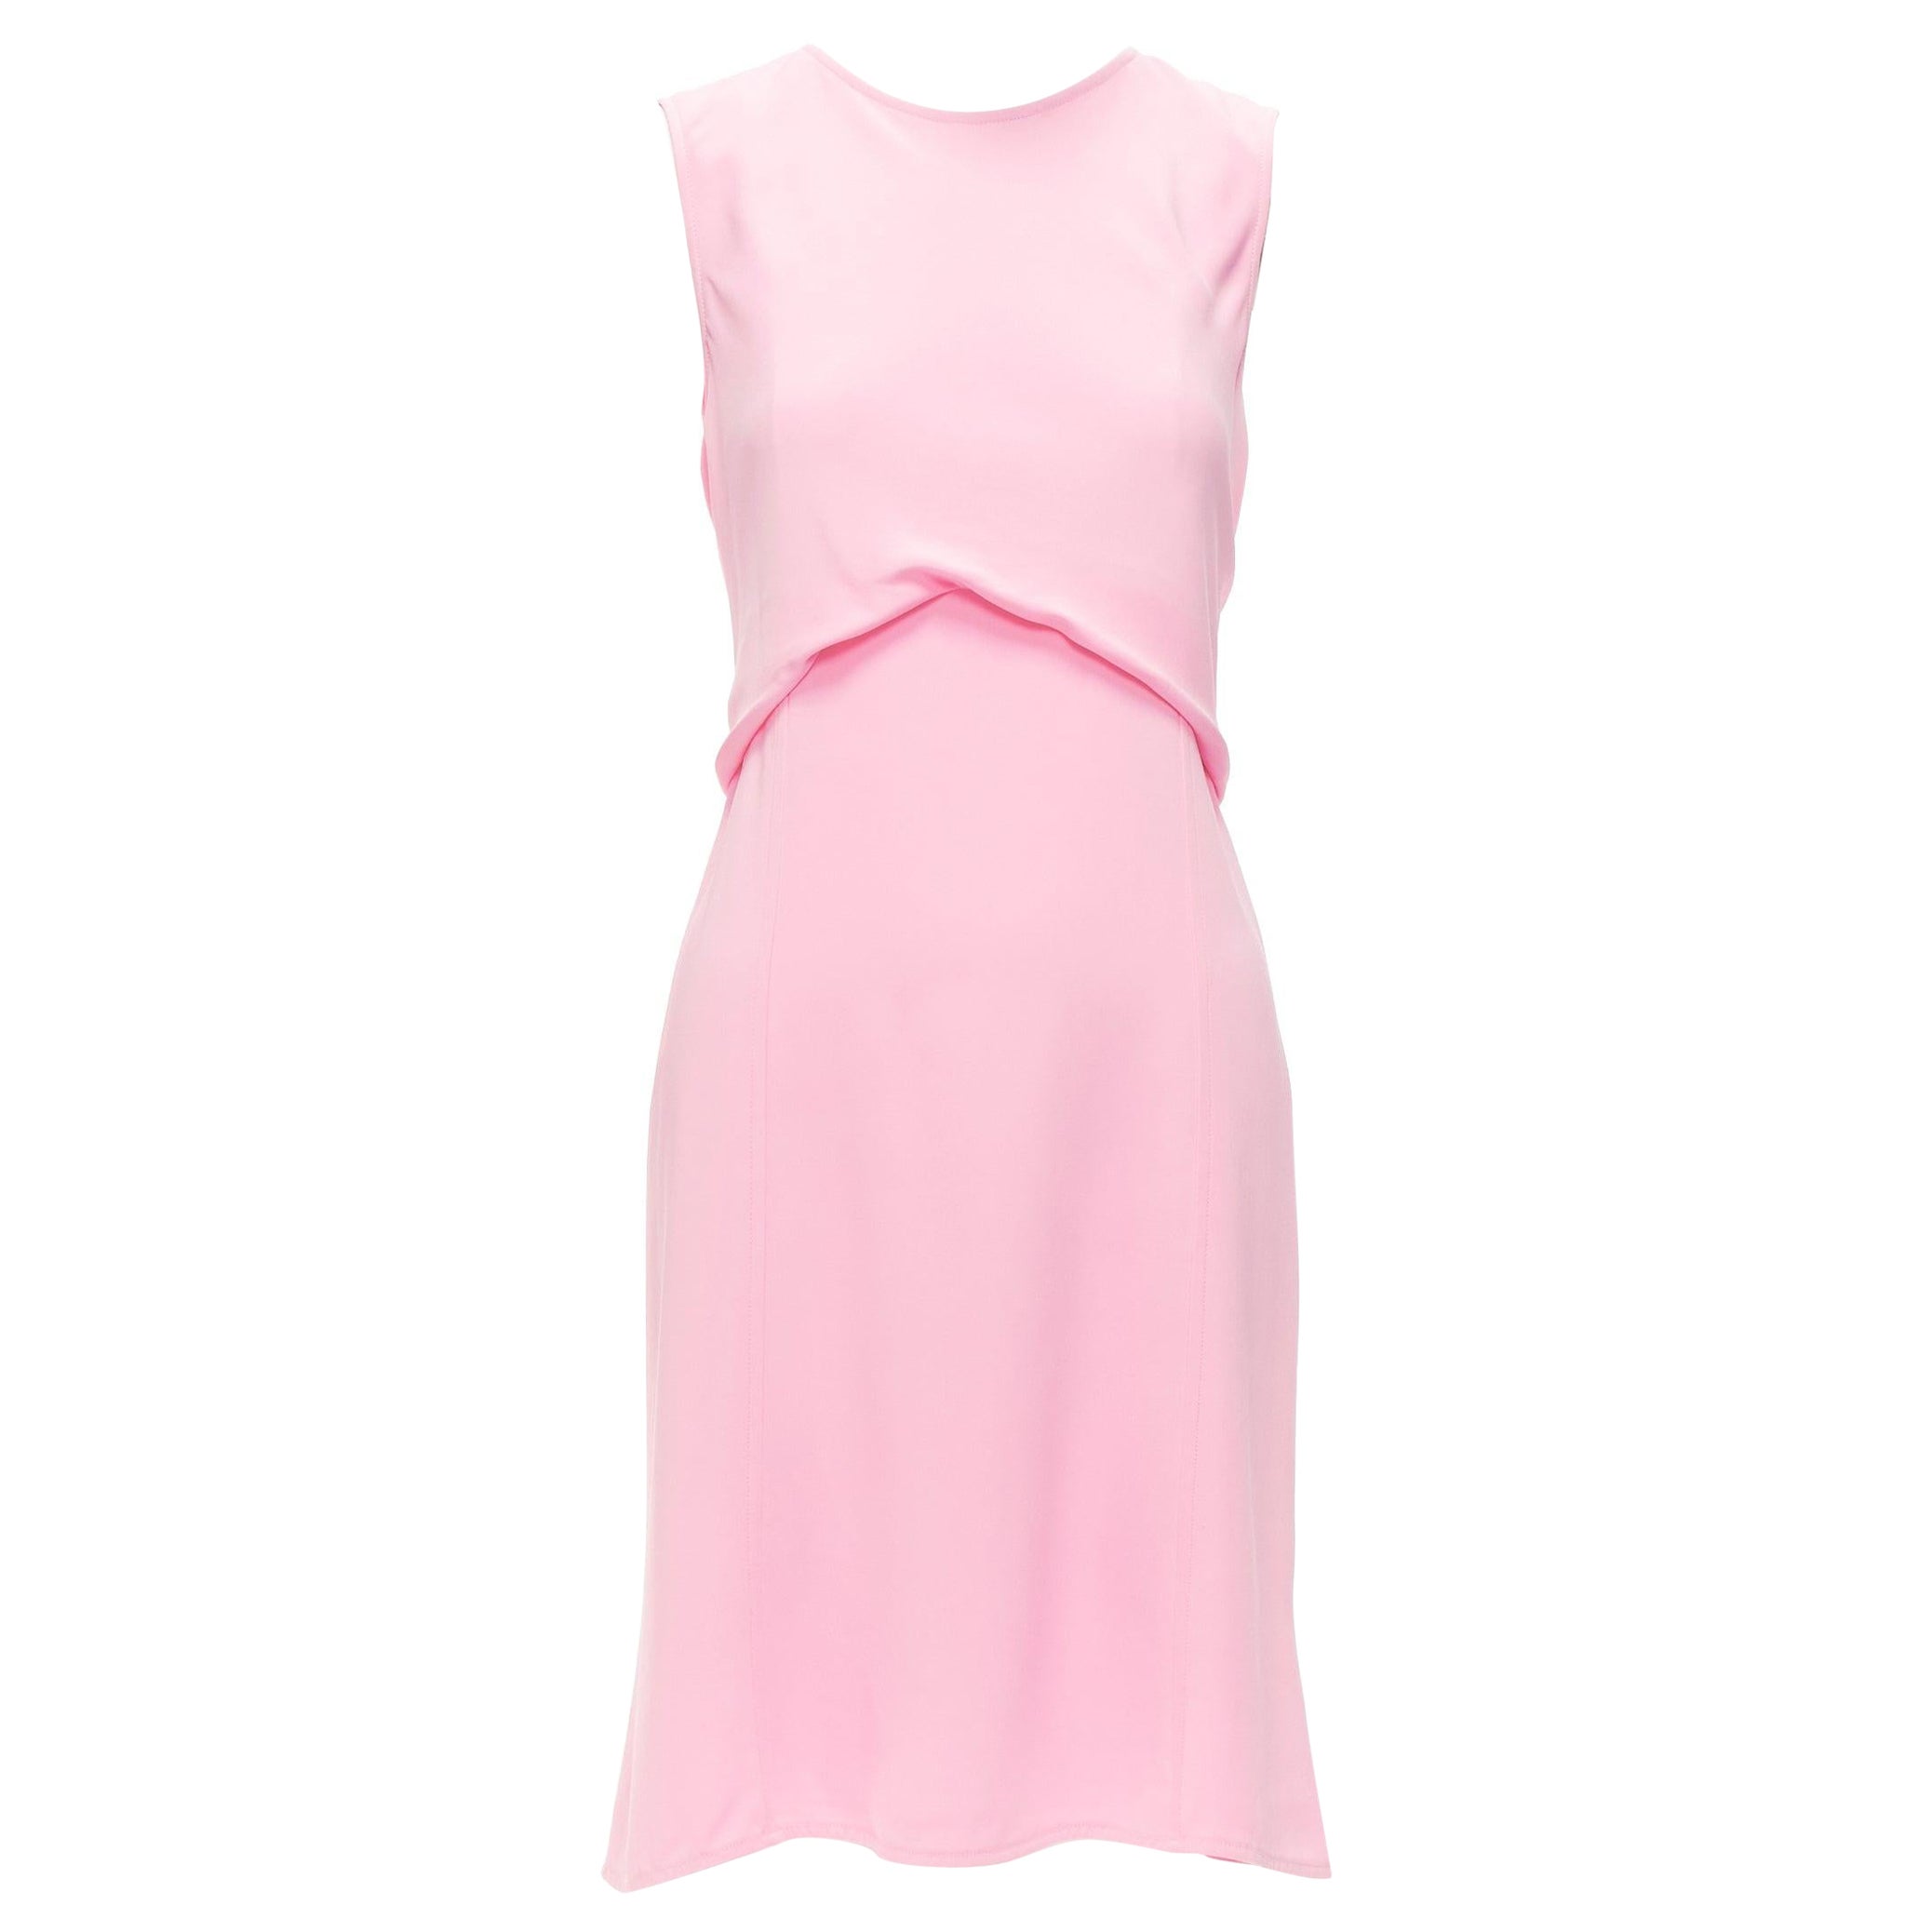 VICTORIA BECKHAM pink silky drape front ruched back sleeveless shift dress For Sale